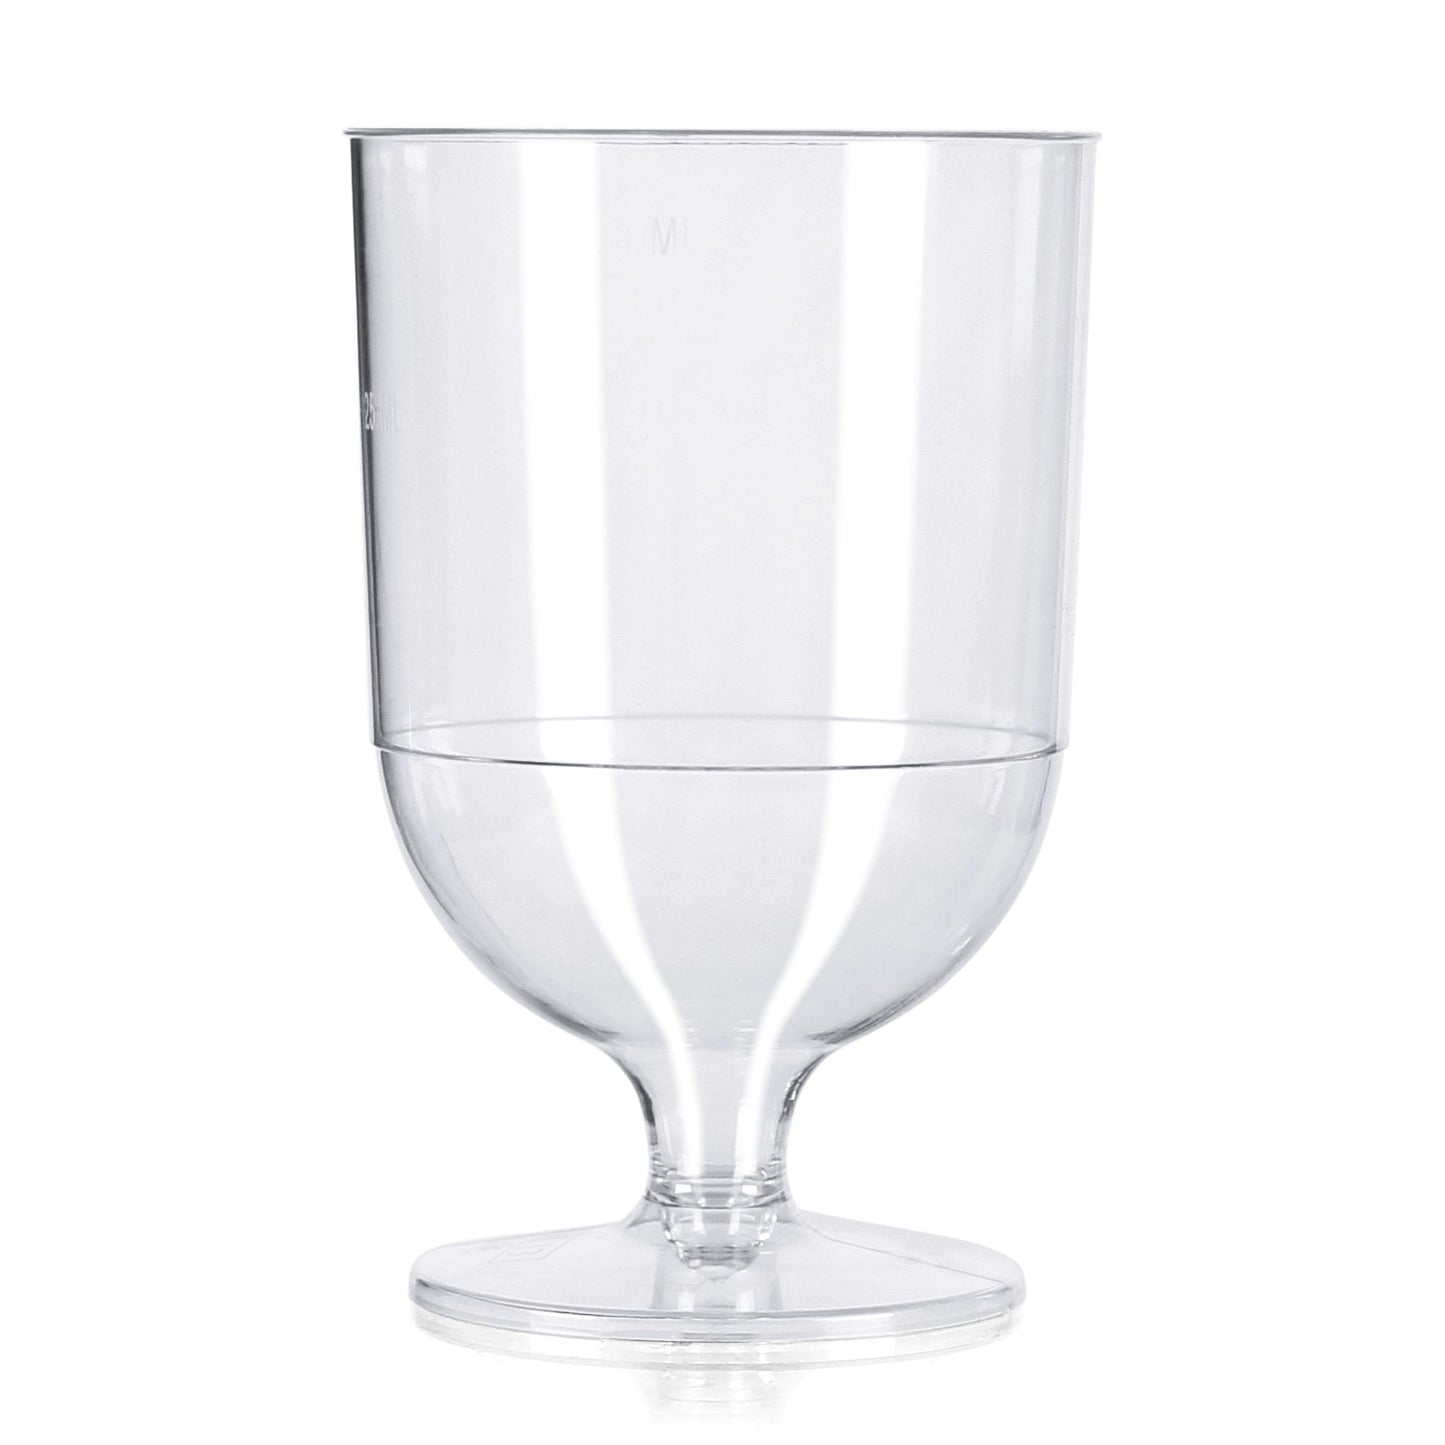 10 Pack x Clear Disposable Wine Glasses - CE Marked at 125ml 175ml - One Piece - Plastic - For Parties, BBQs, Festivals